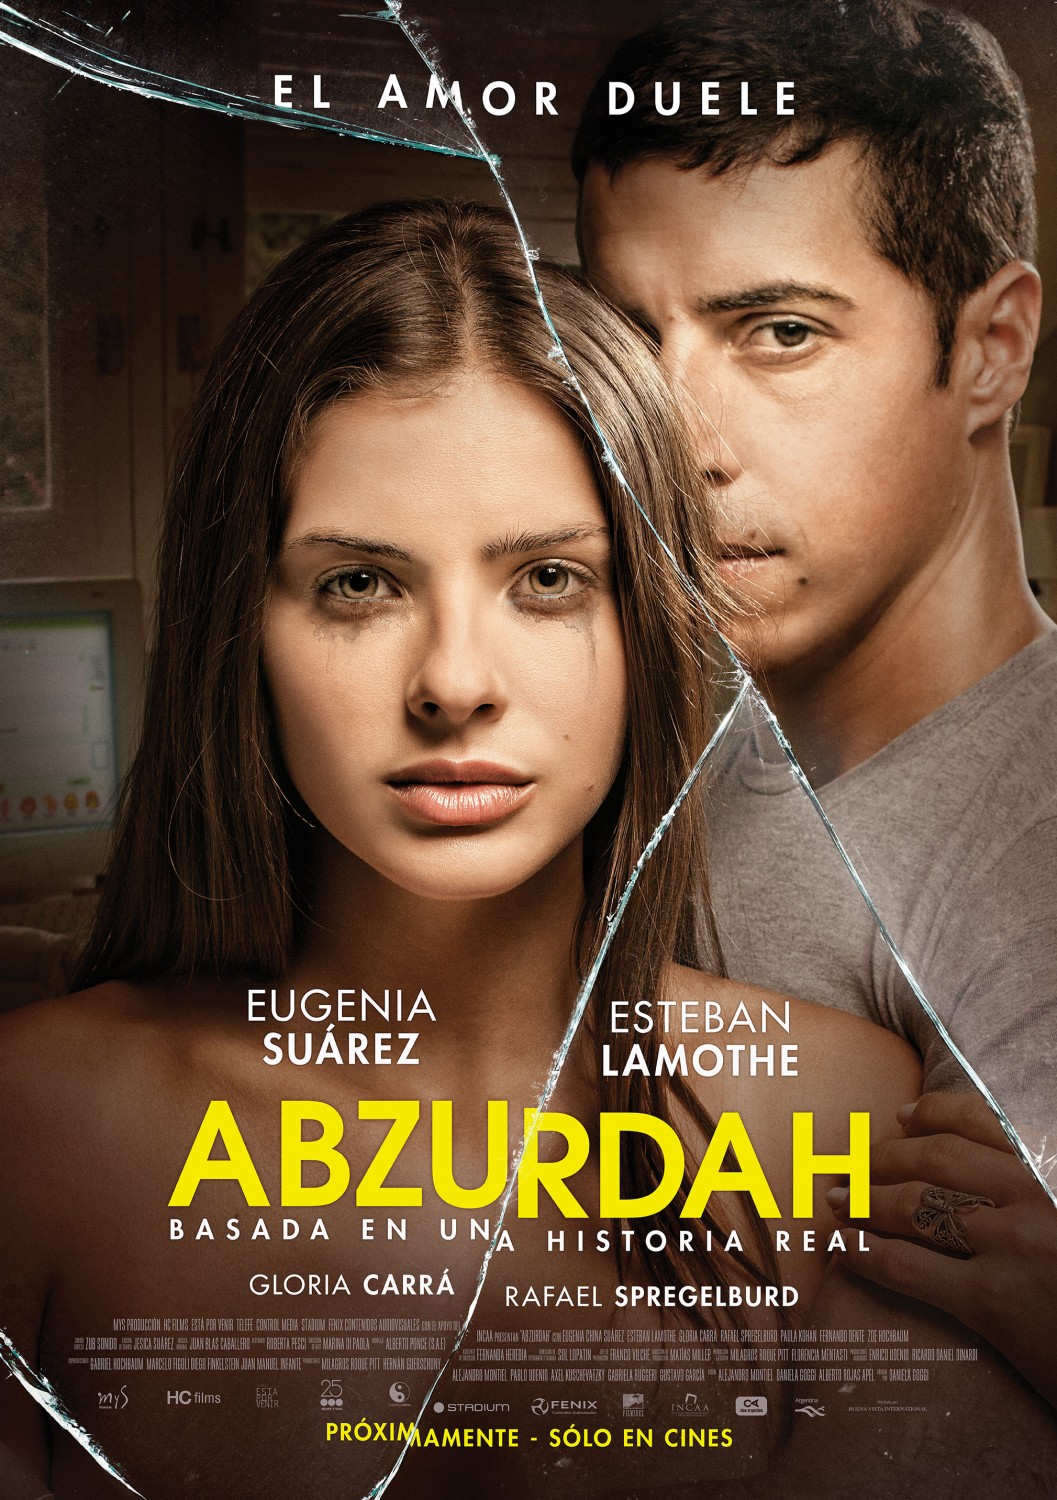 Extra Large Movie Poster Image for Abzurdah (#2 of 2)